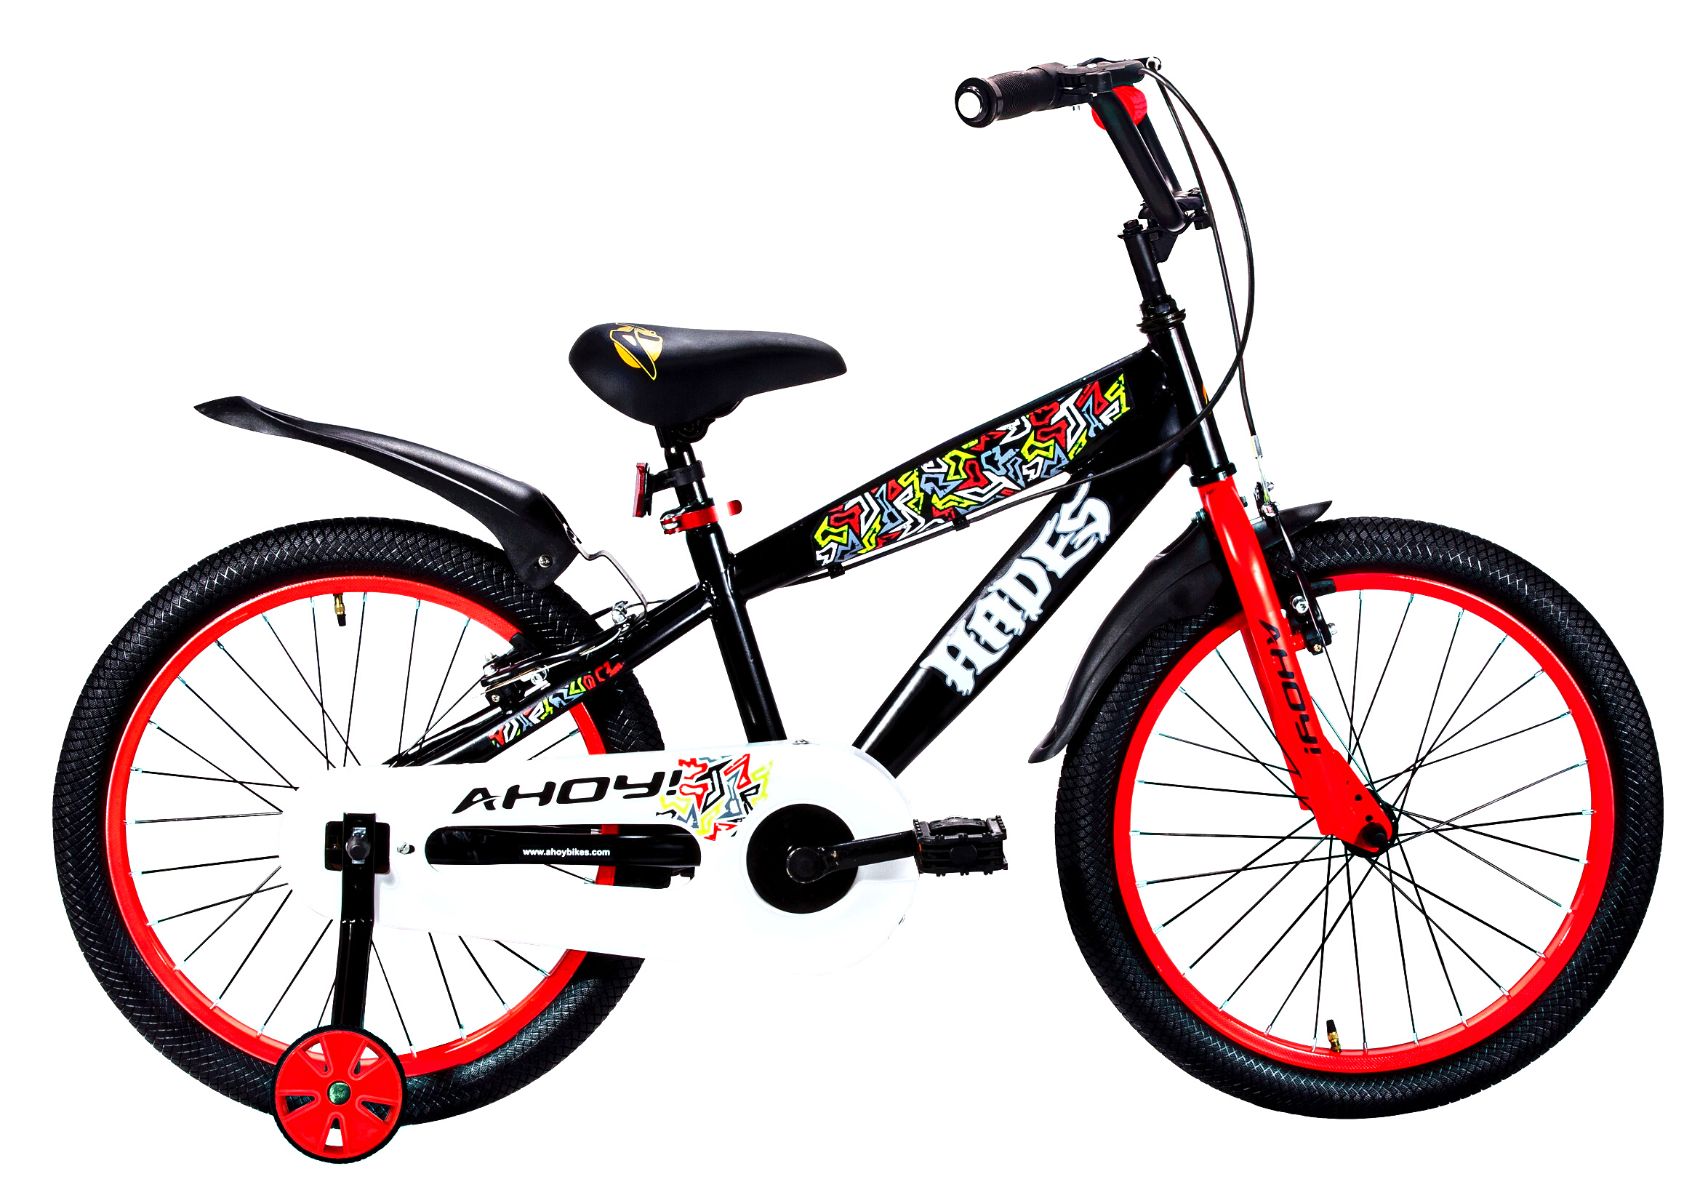 Hades Kids Bike 20T Single Speed | Buy Red Cycle Non Gear for Juniors